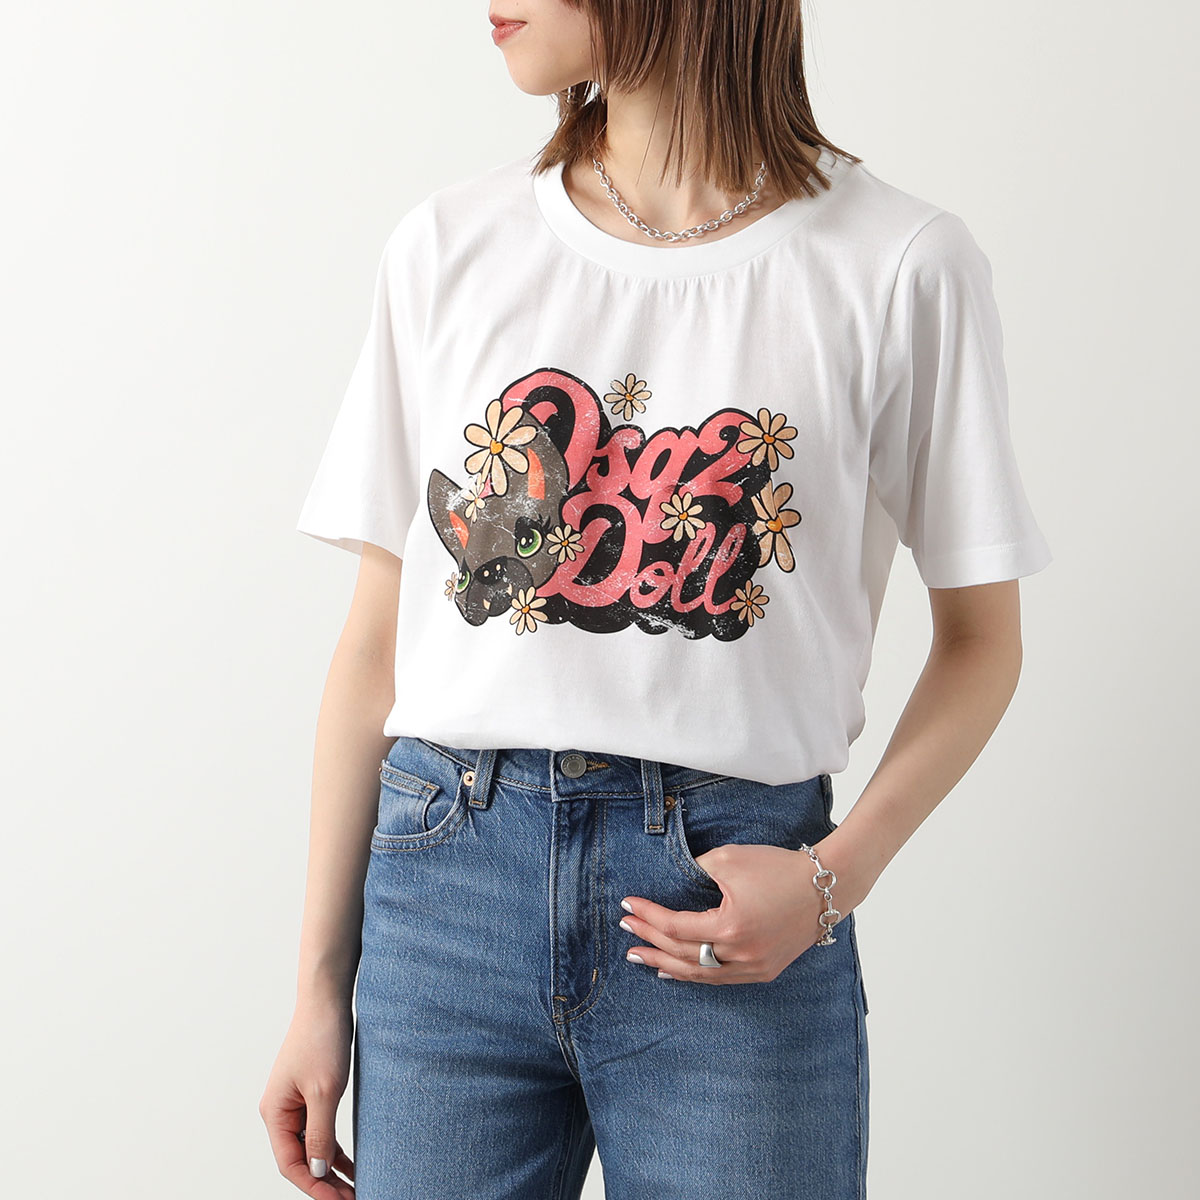 DSQUARED2 ディースクエアード Tシャツ HILDE DOLL EASY FIT S75GD...